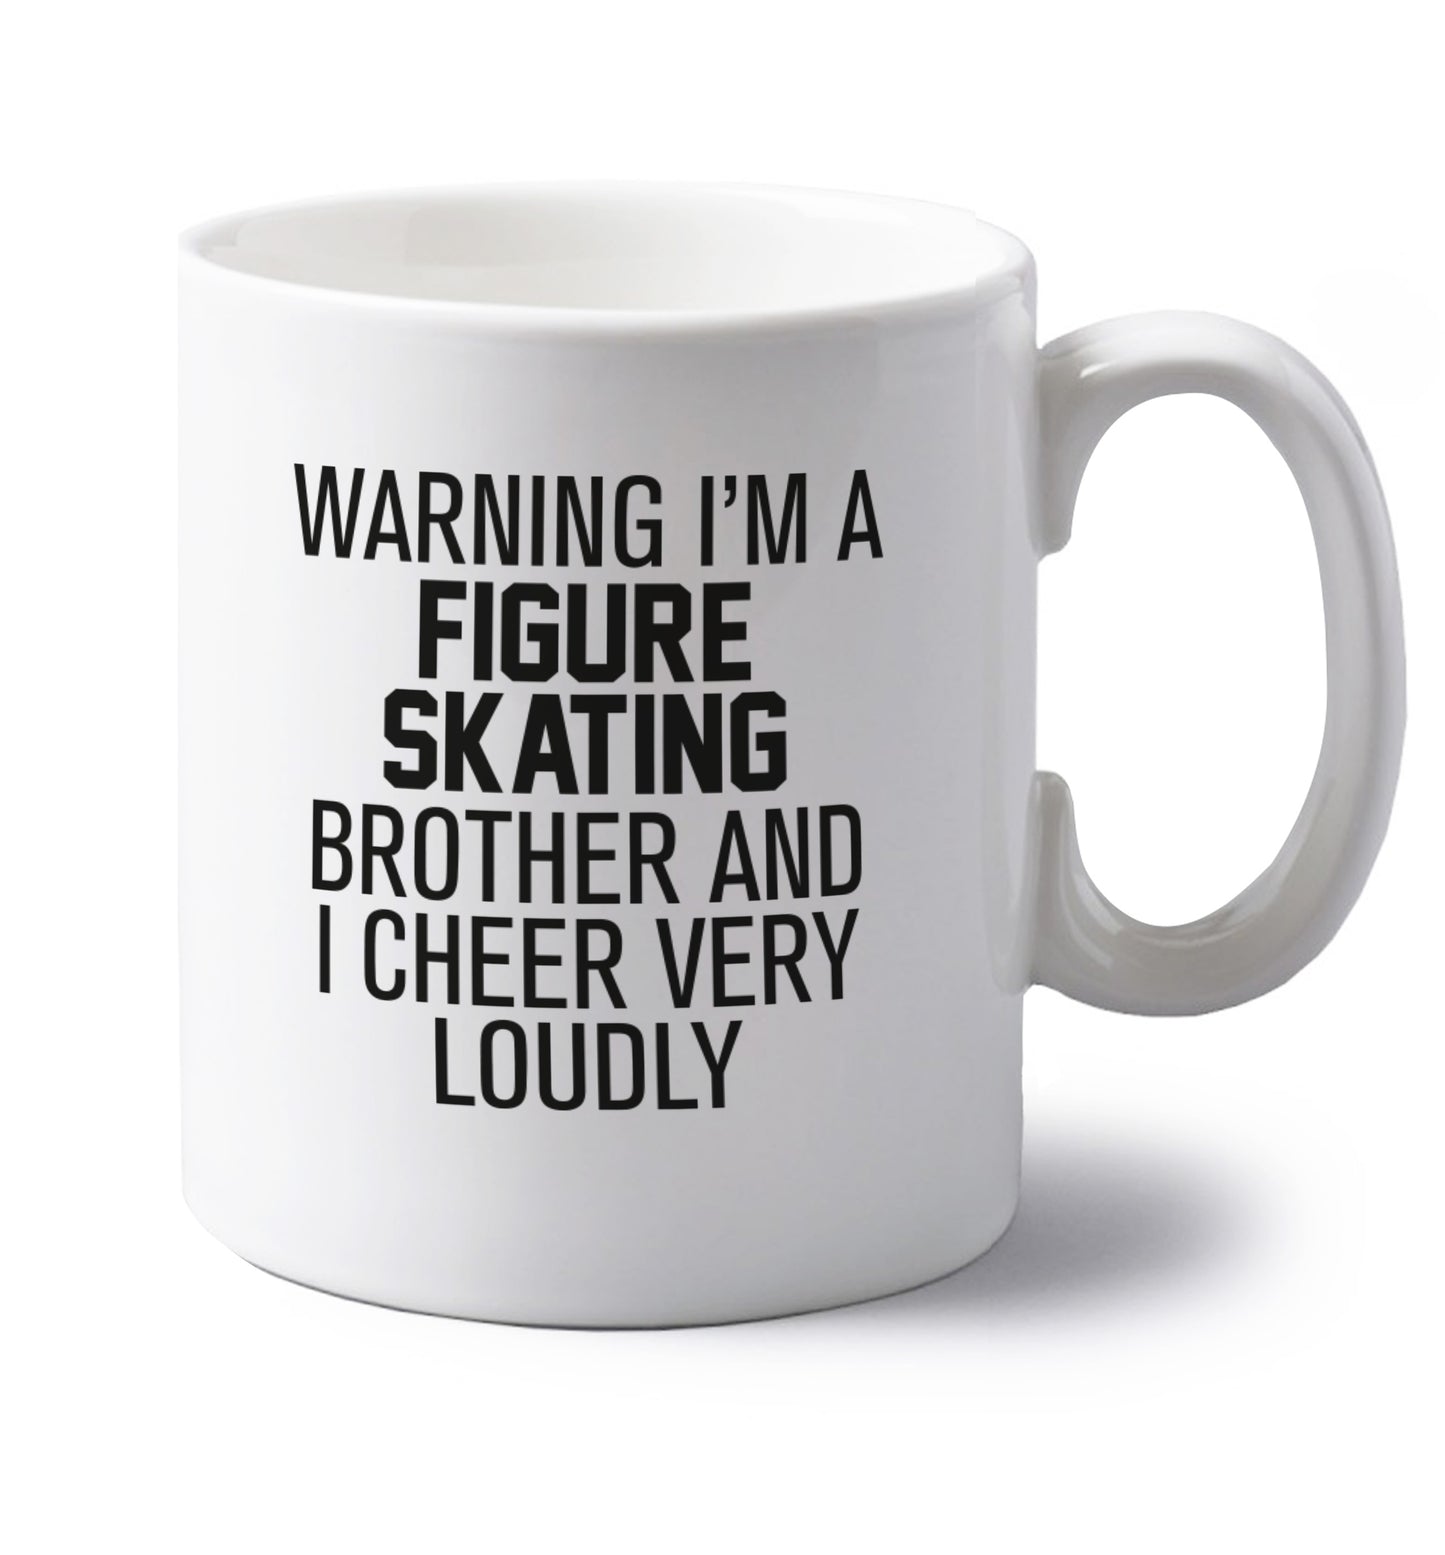 Warning I'm a figure skating brother and I cheer very loudly left handed white ceramic mug 